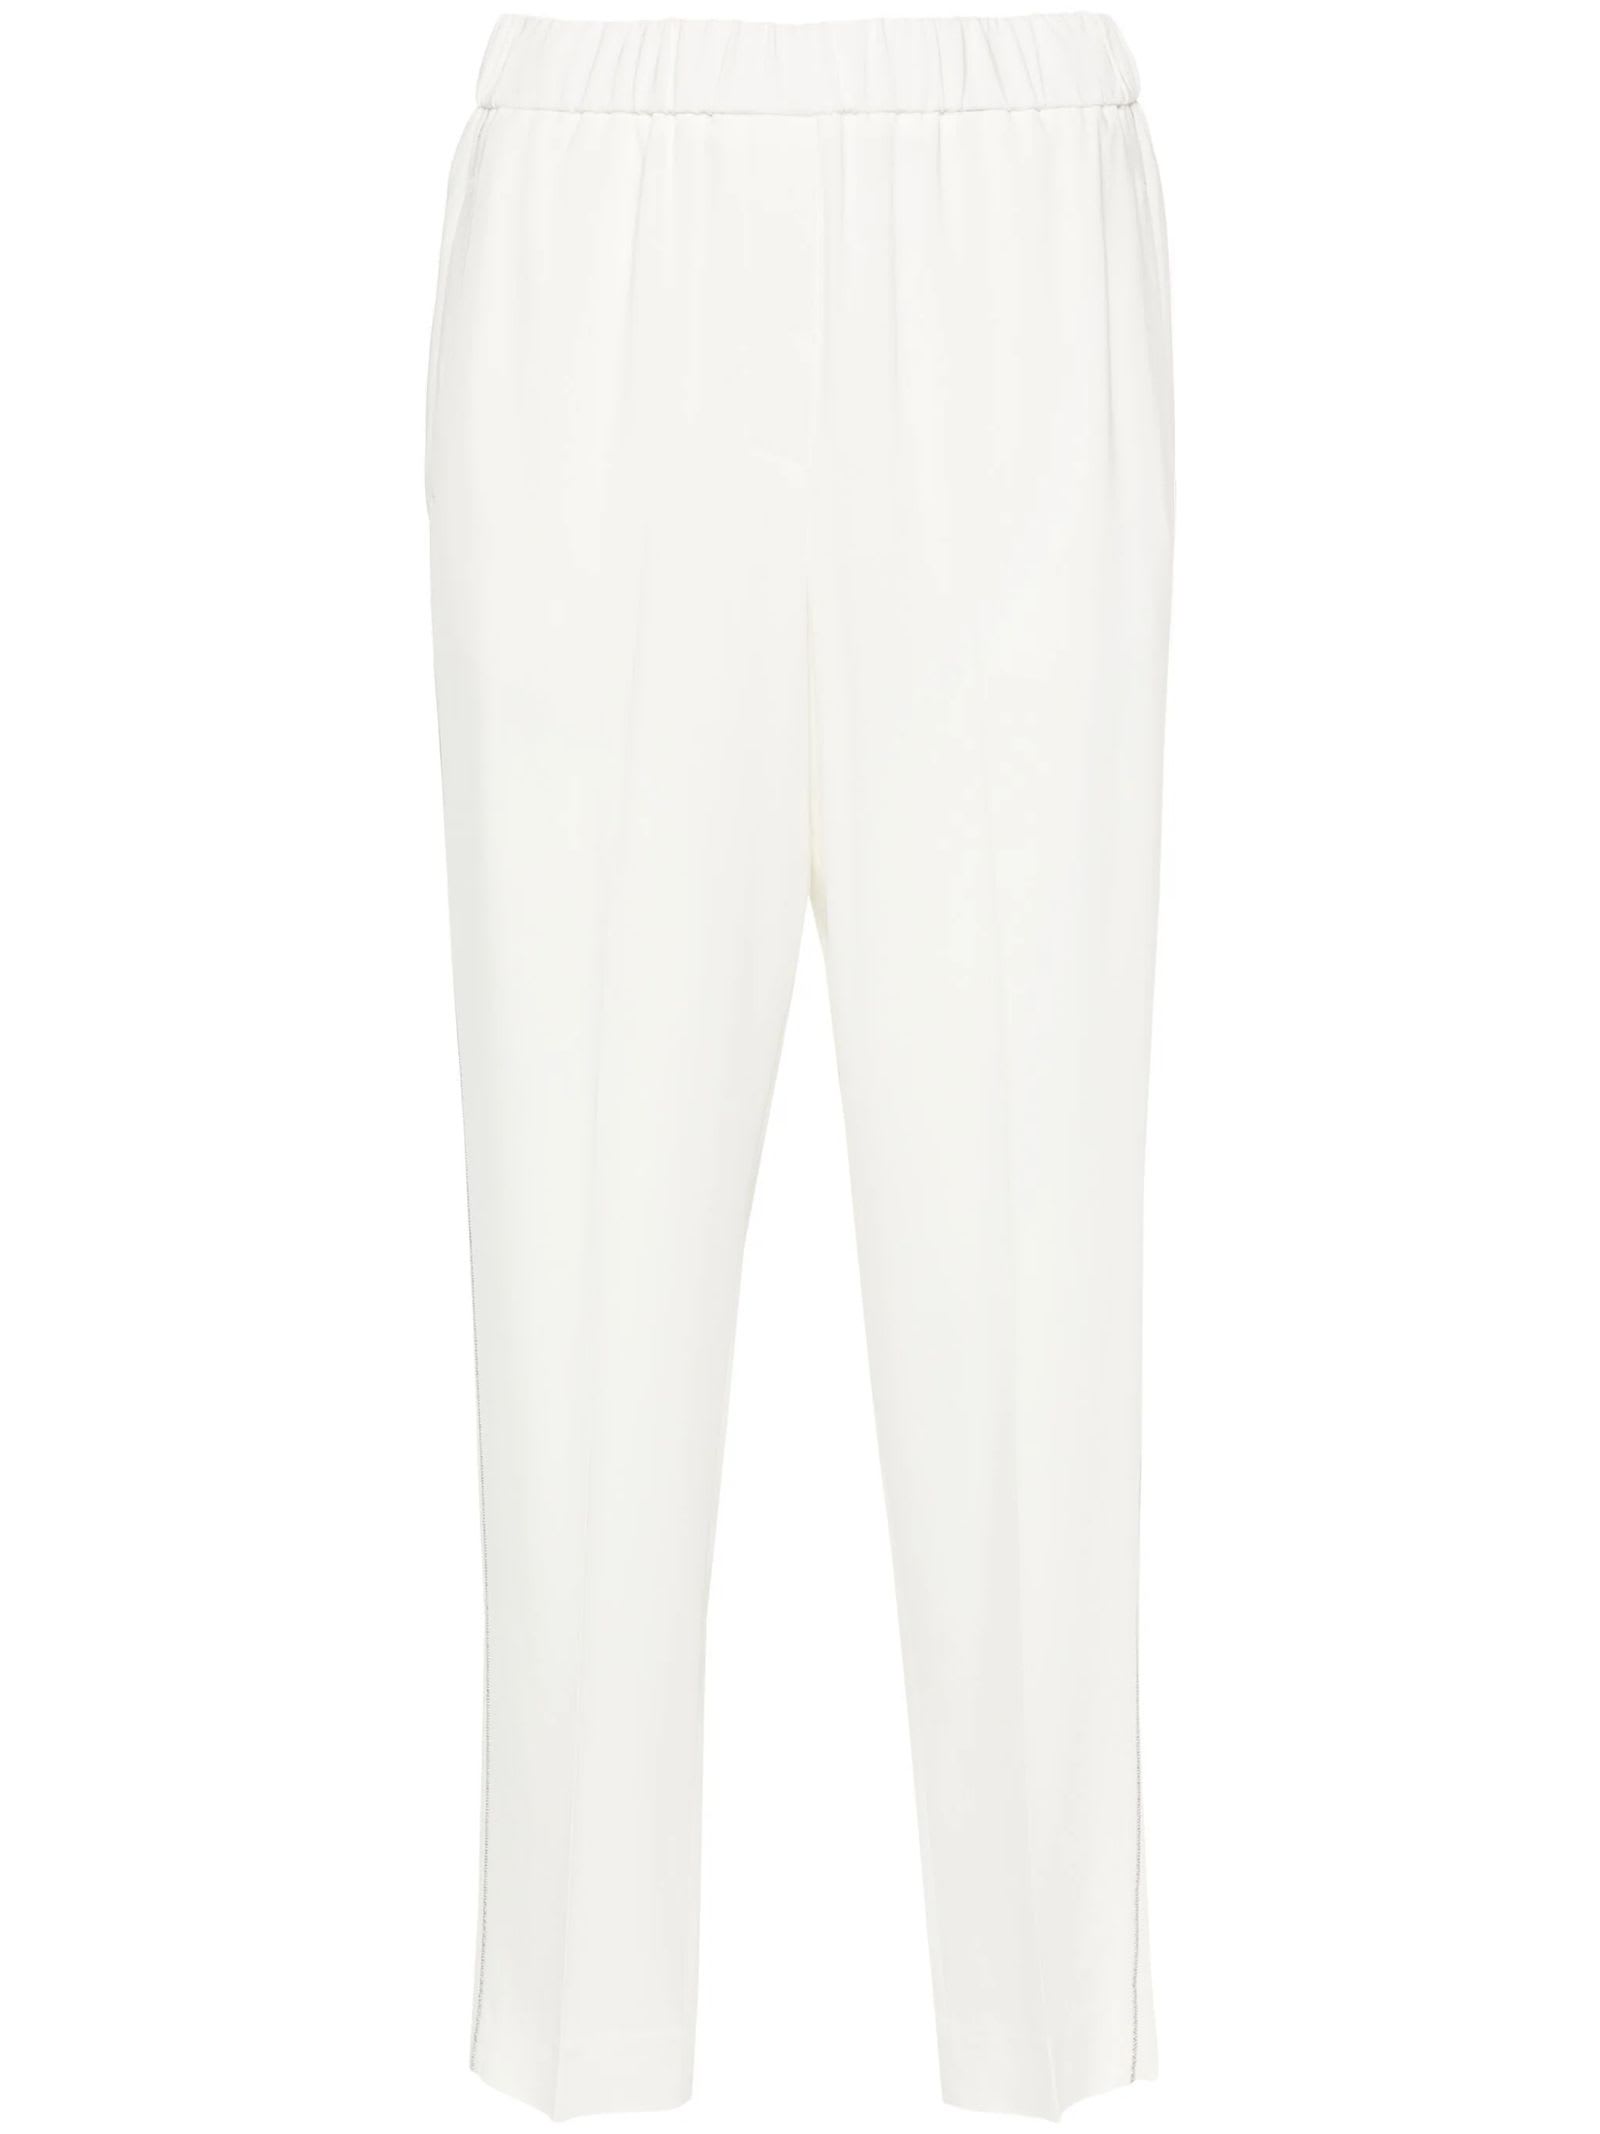 Shop Peserico Ivory White Tapered Trousers